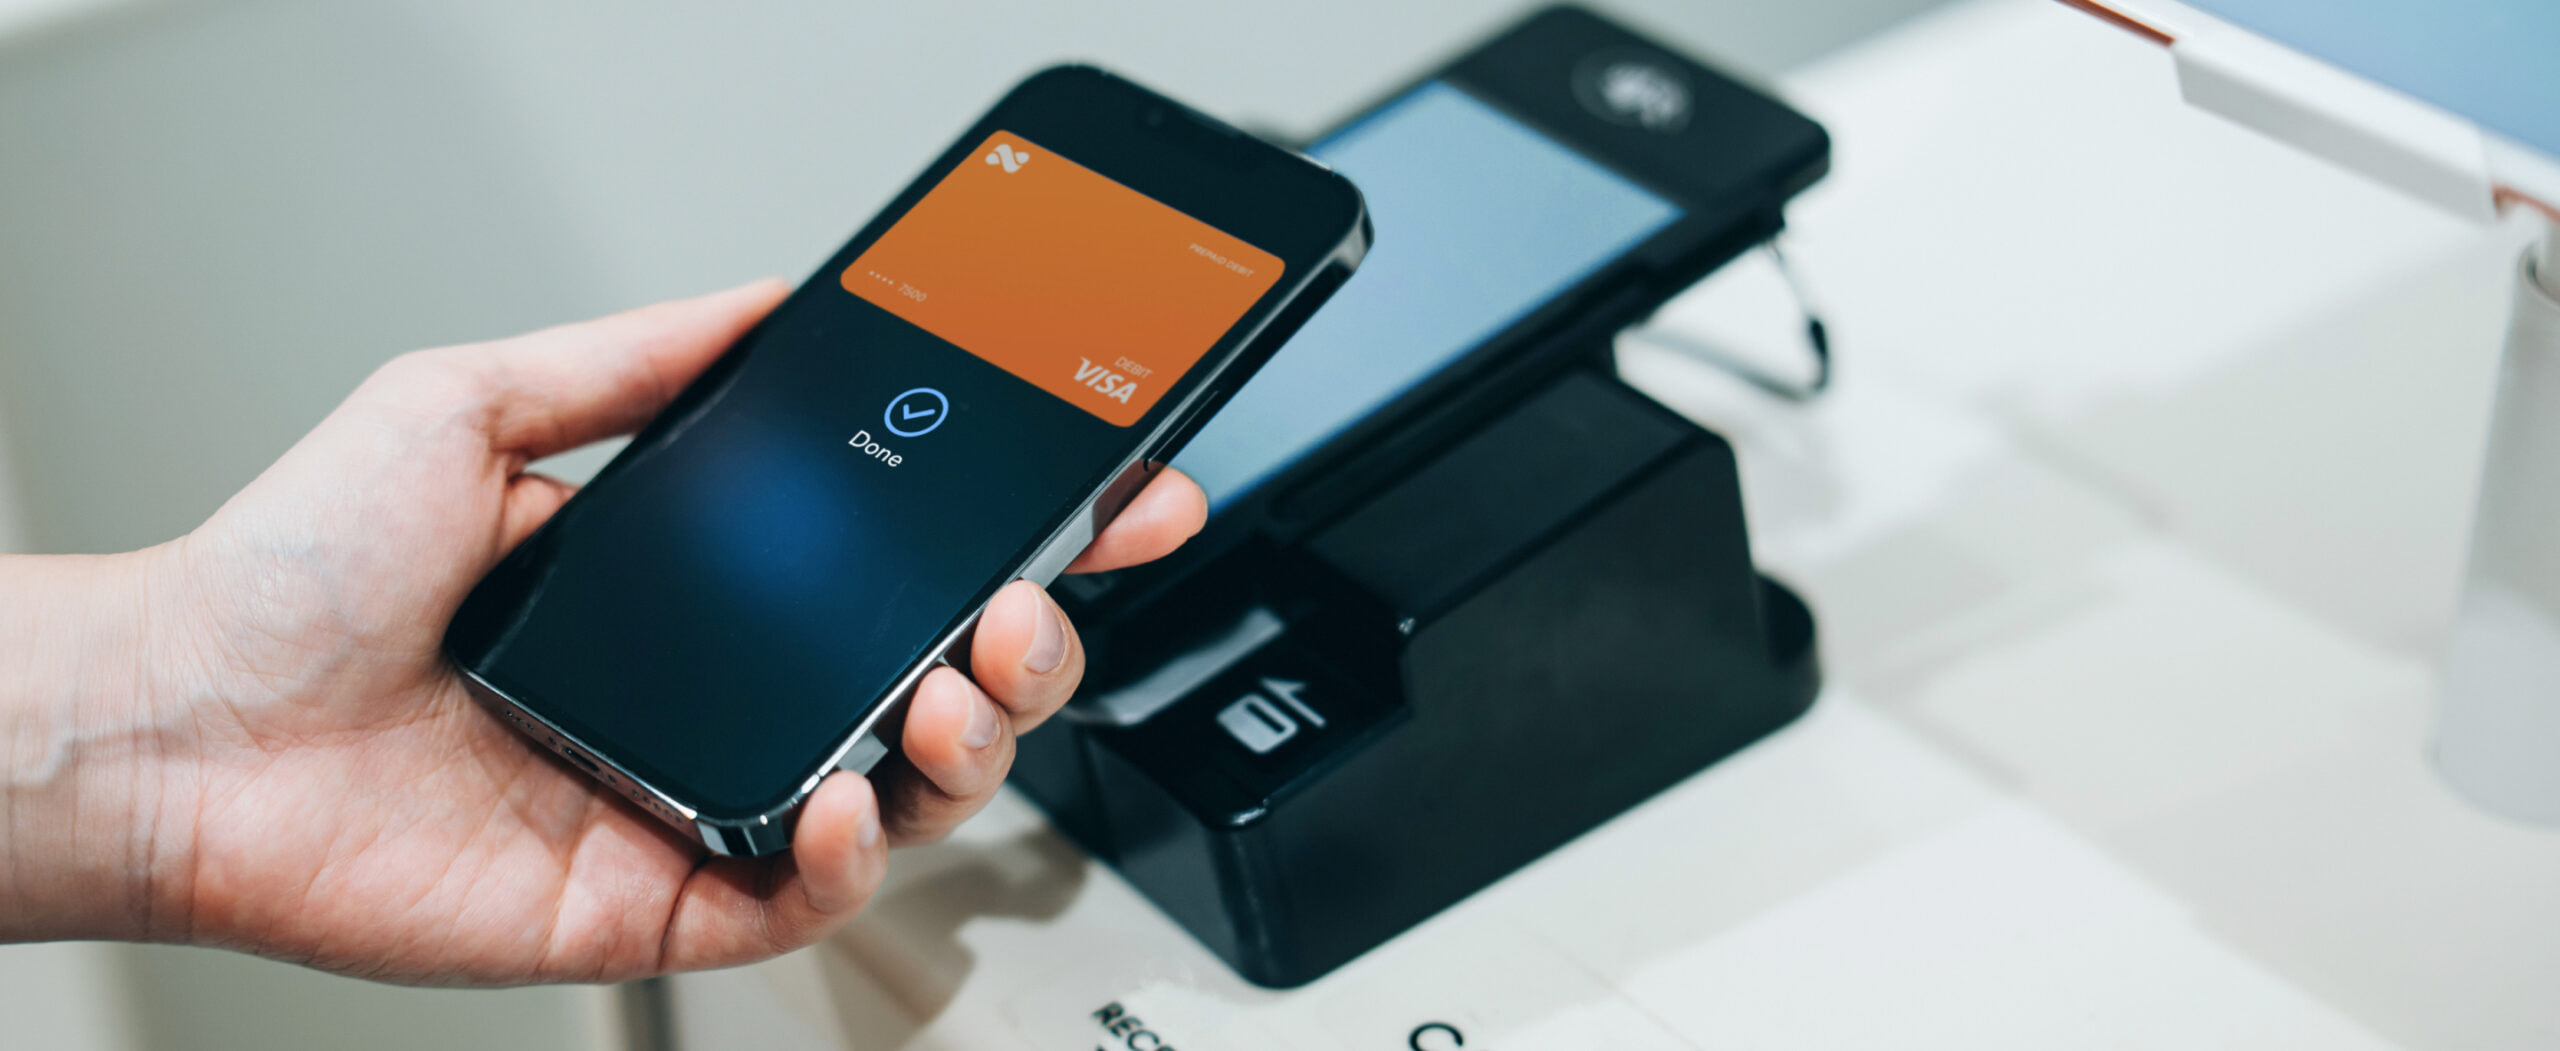 Paying with a Netspend card in an iPhone digital wallet